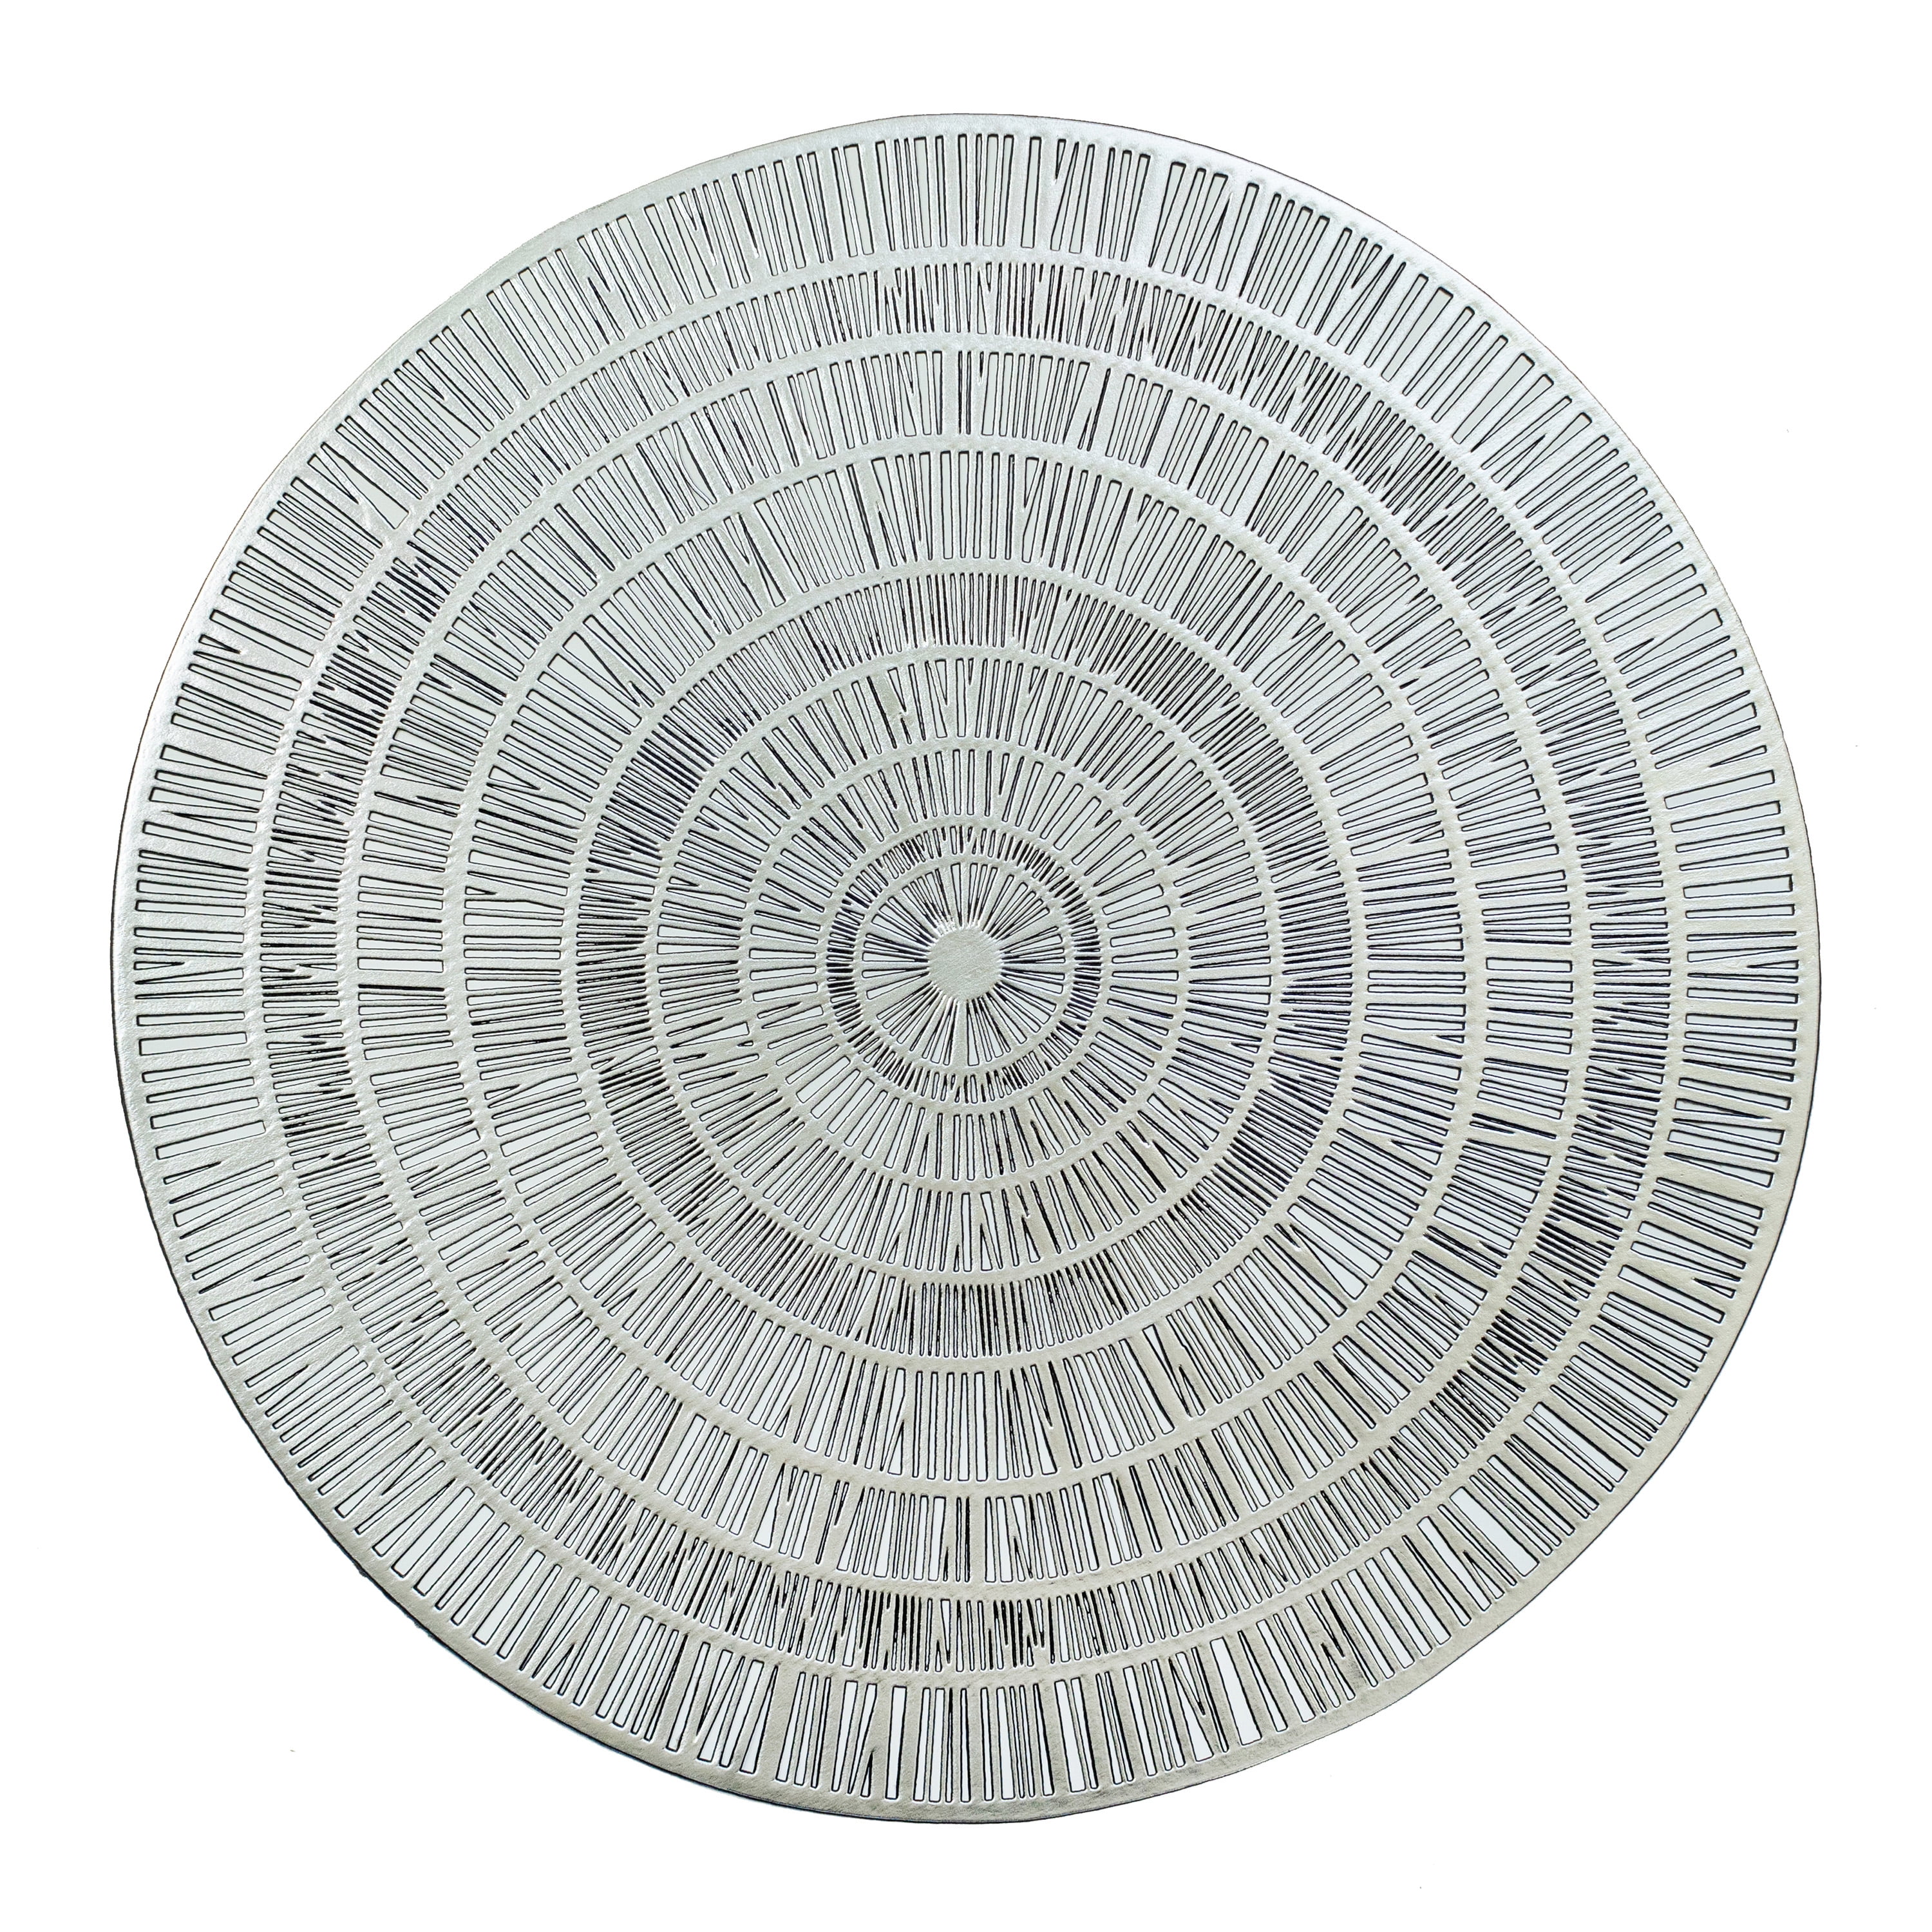 Mainstays Zayne Pressed Vinyl Round Table Placemat Silver/Black 15.8" RD (1 piece)